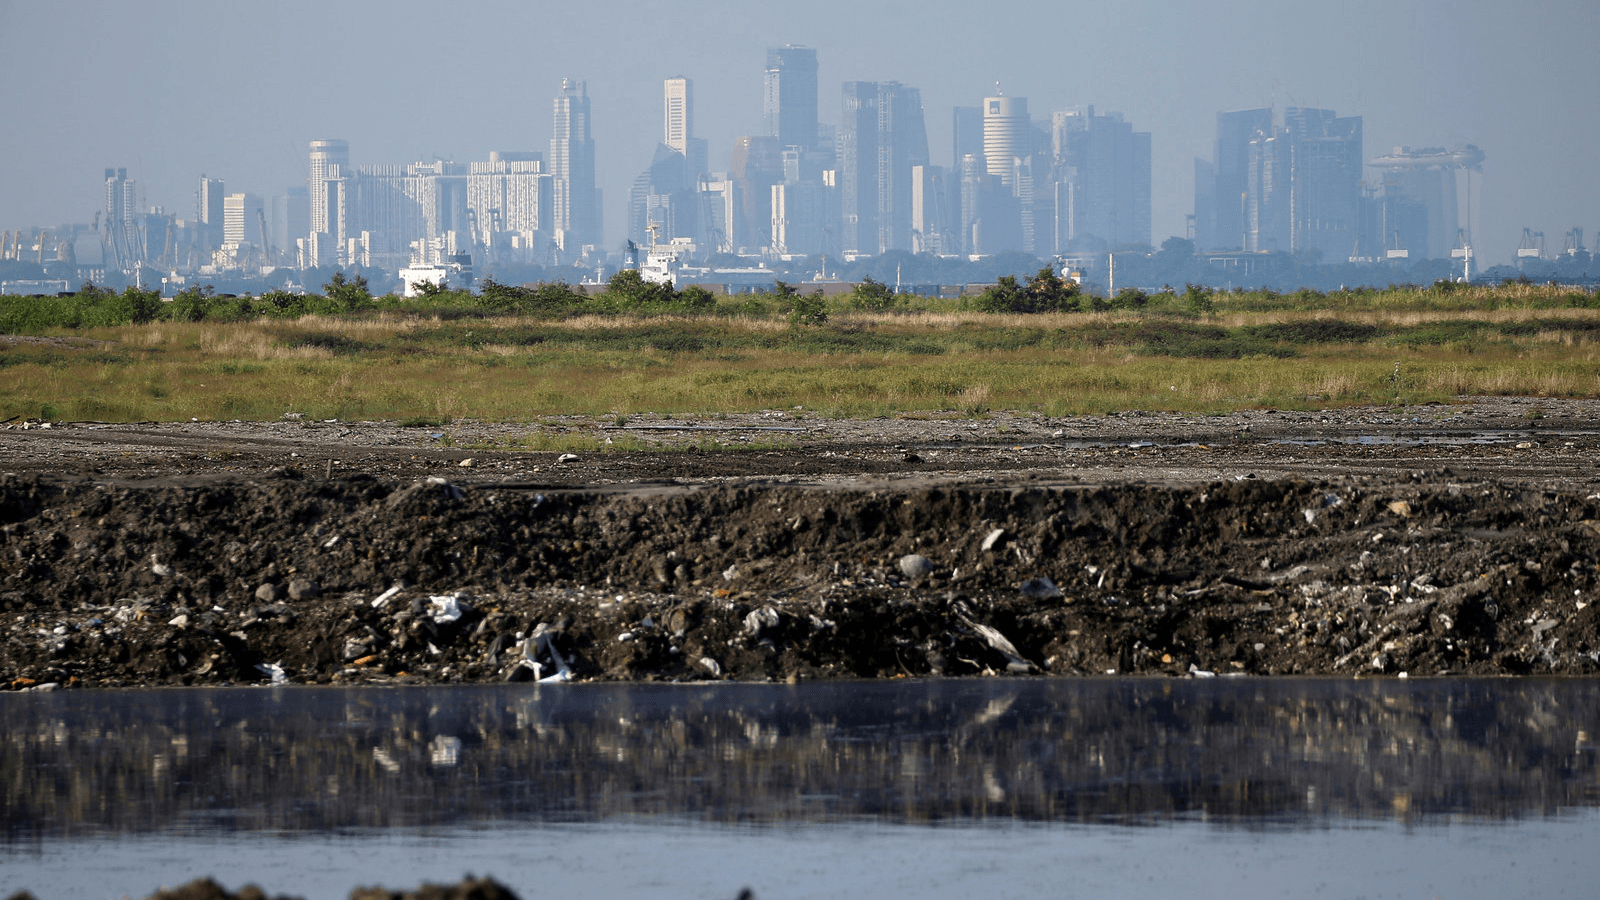 the singapore skyline in the background and a landfill in the foreground